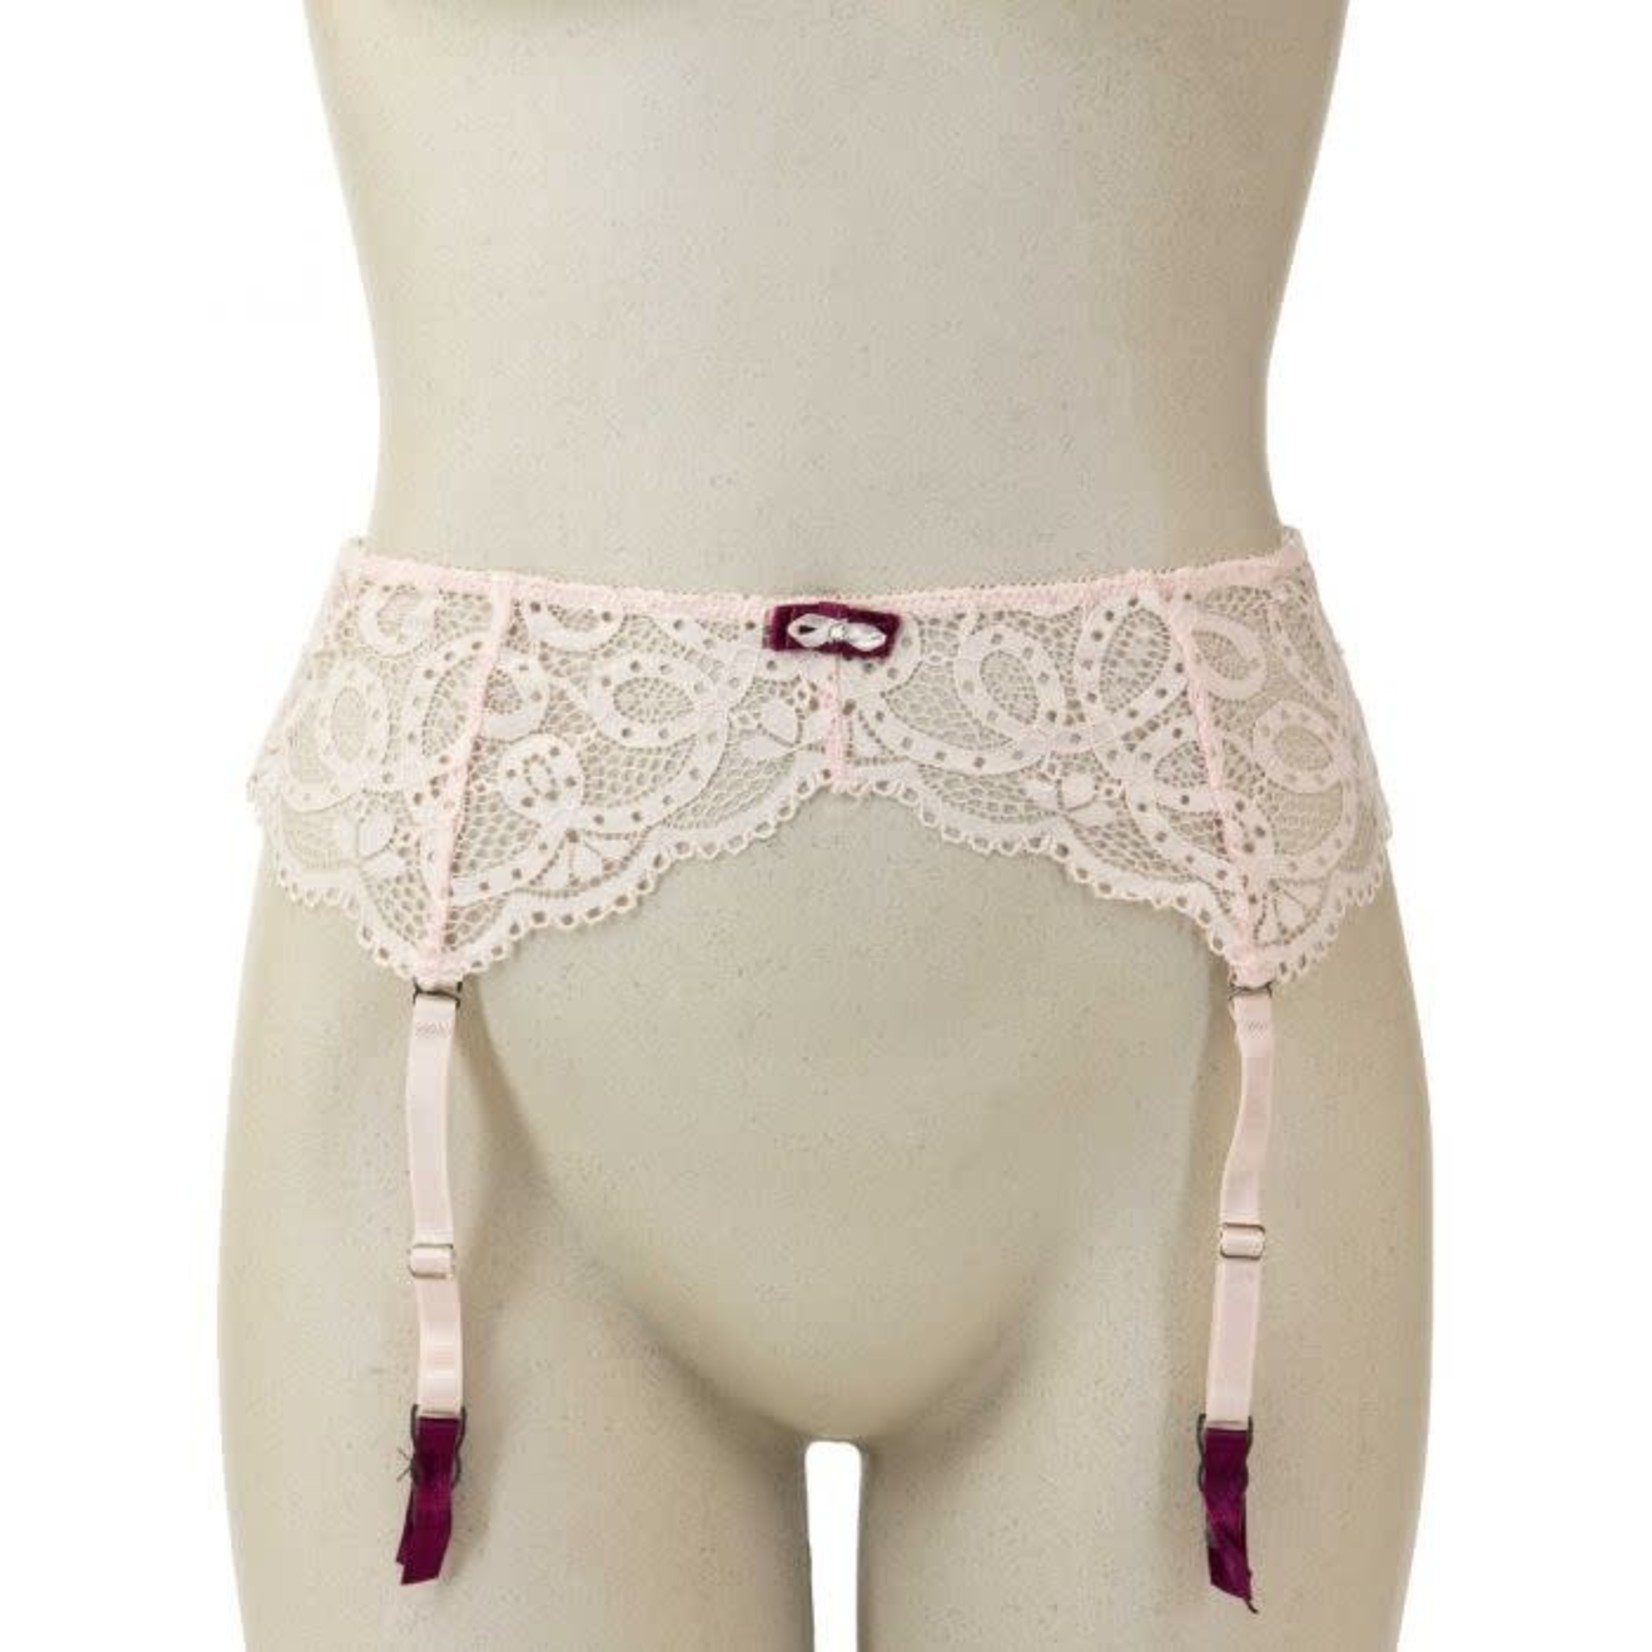 SOPHIE B - DELICATE LACE GARTER - PINK - SMALL